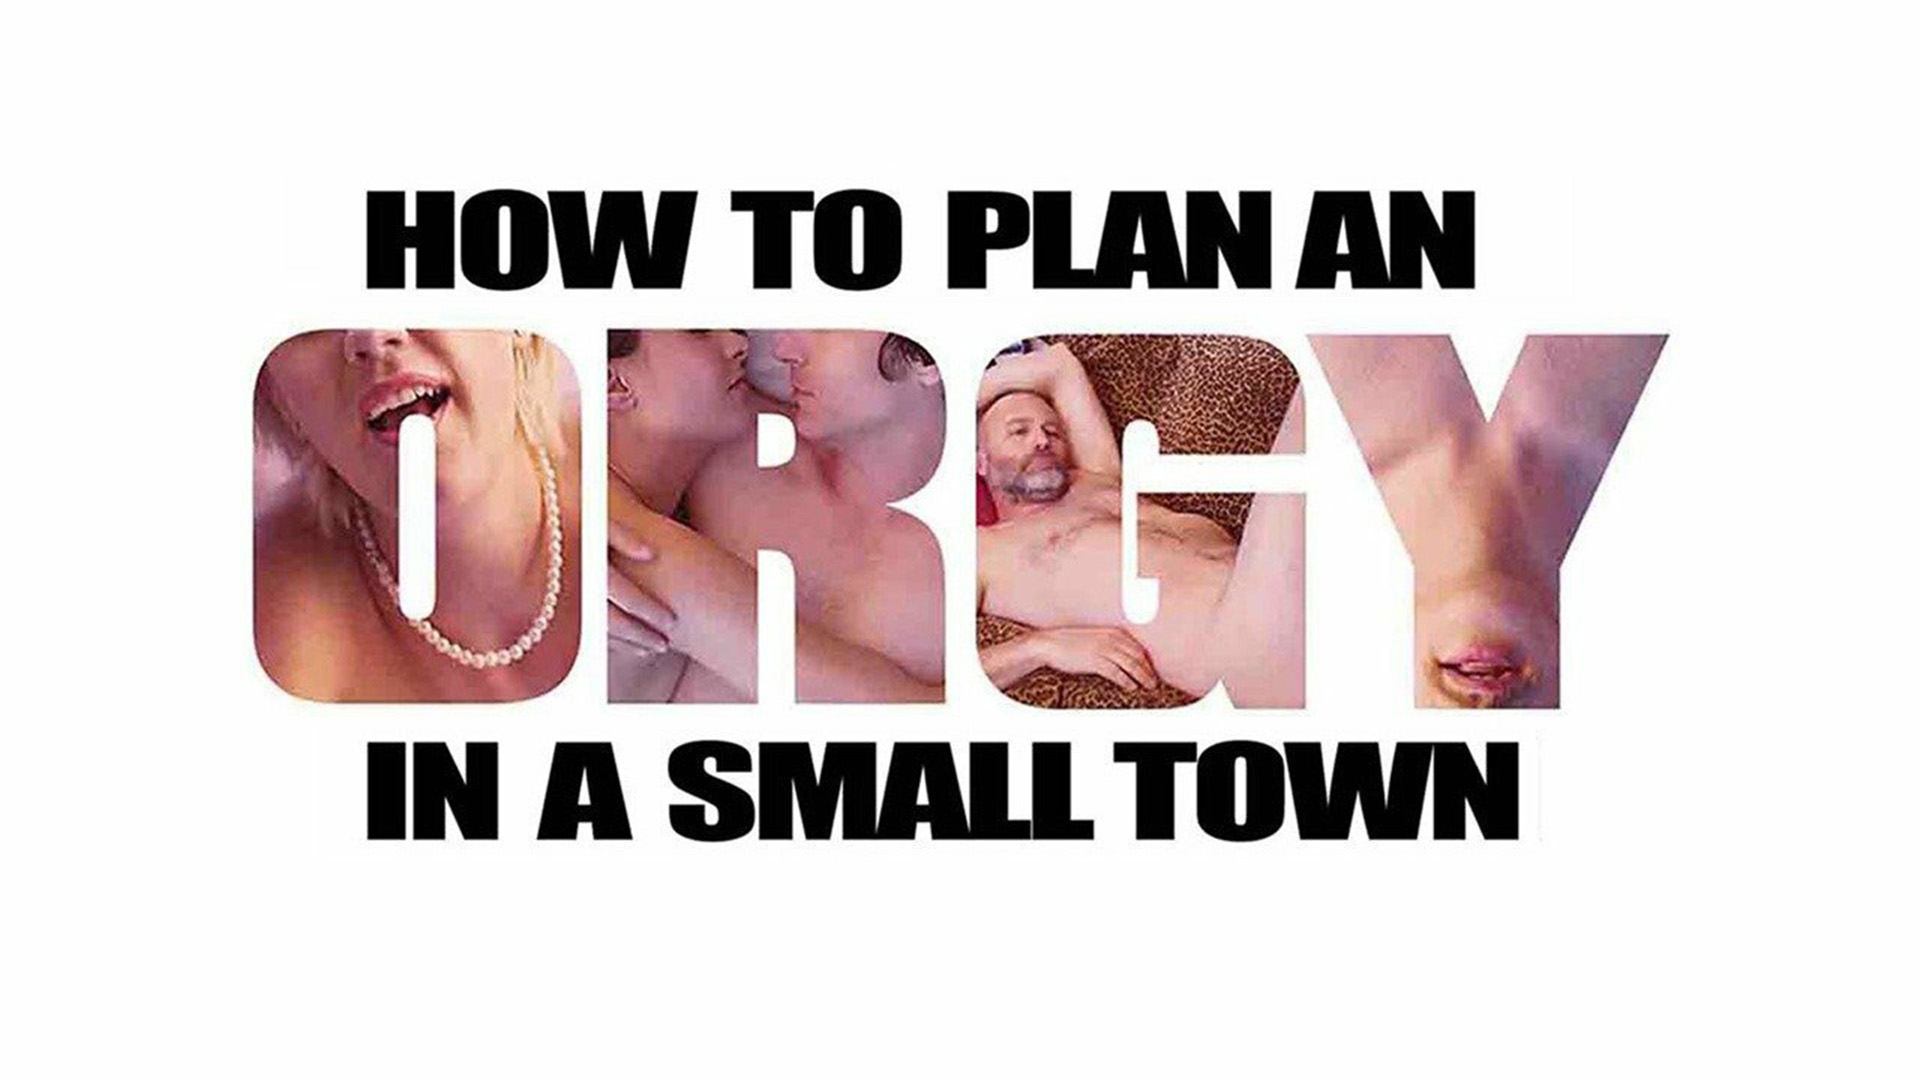 How To Plan An Orgy In A Small Town